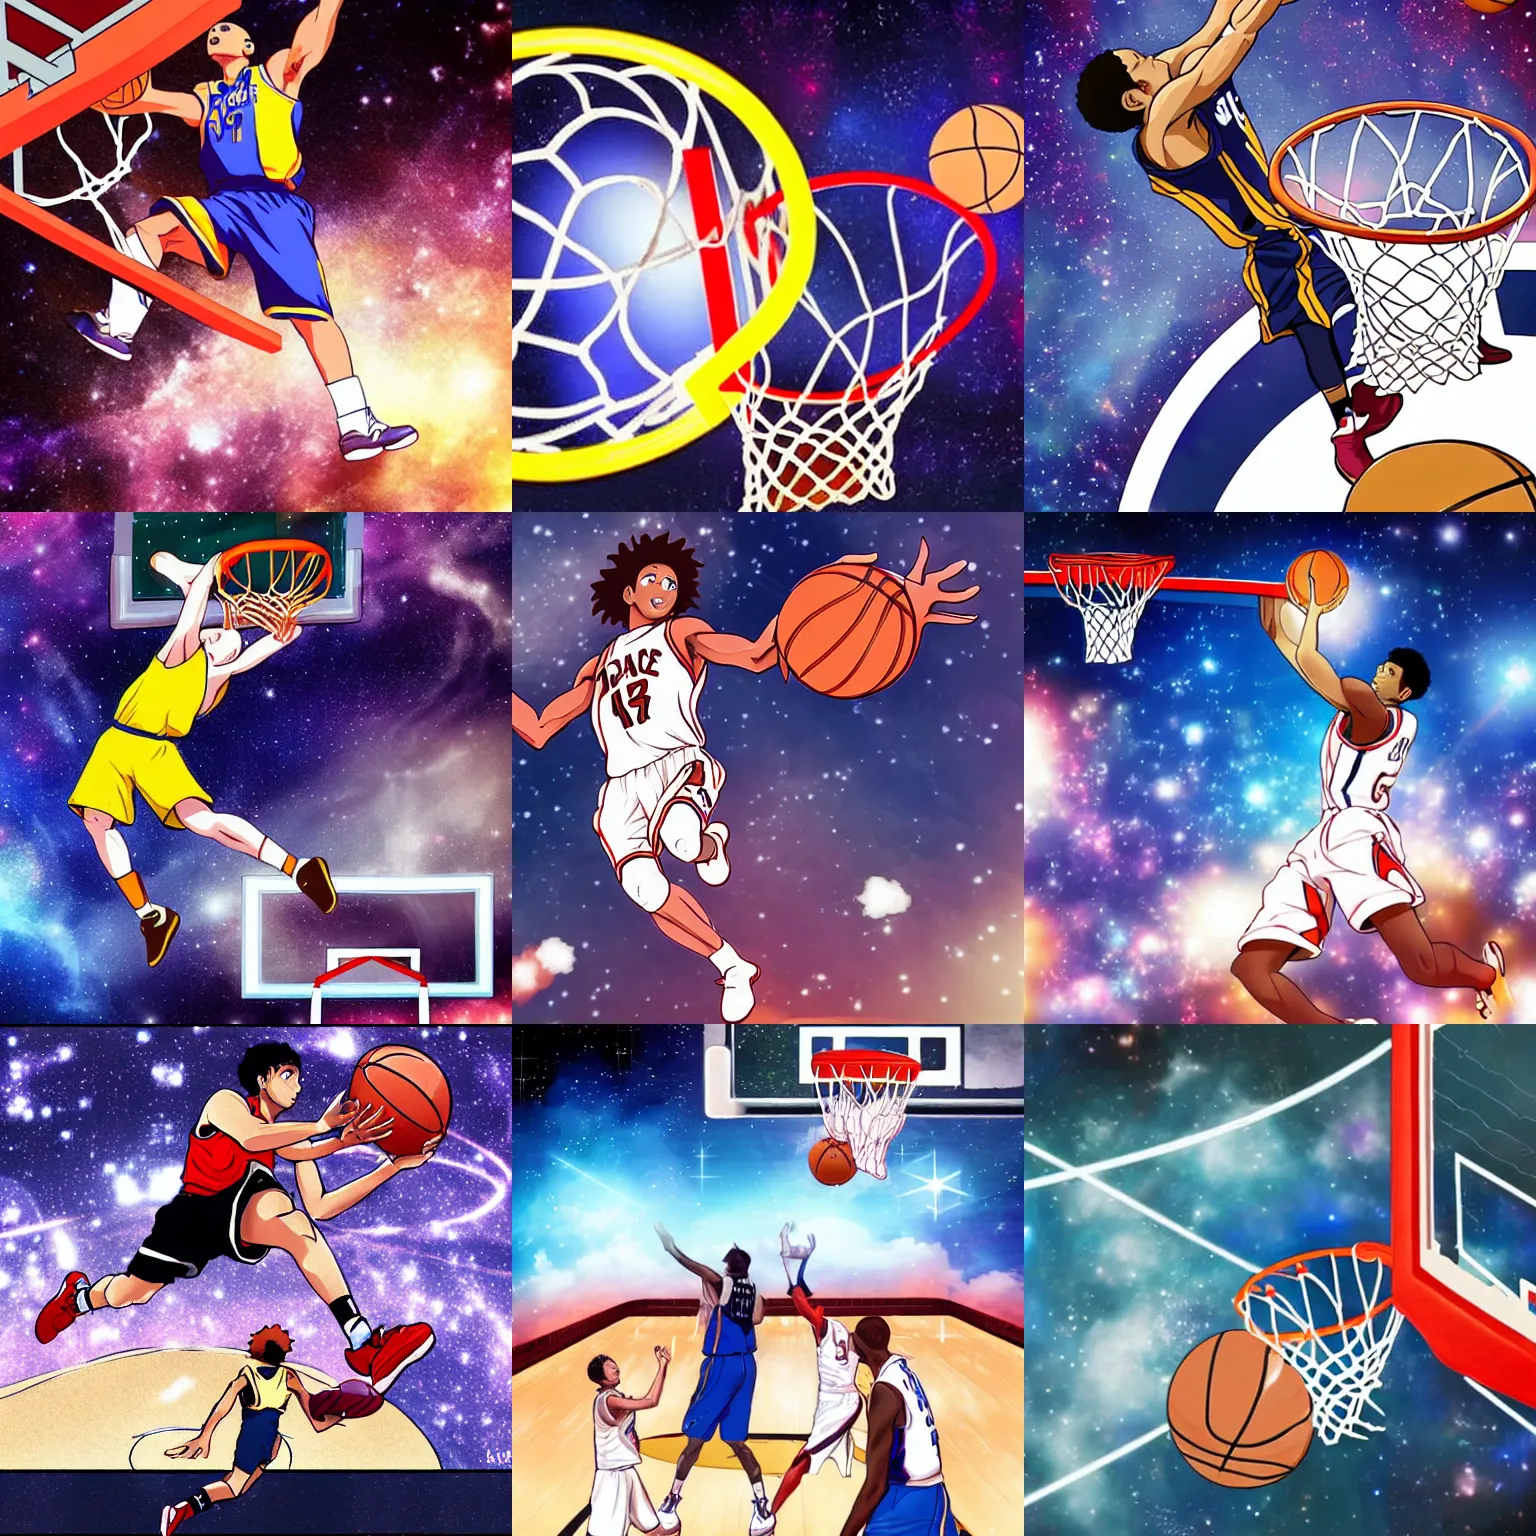 Prompt: A basketball player performing a slam dunk in the space, anime